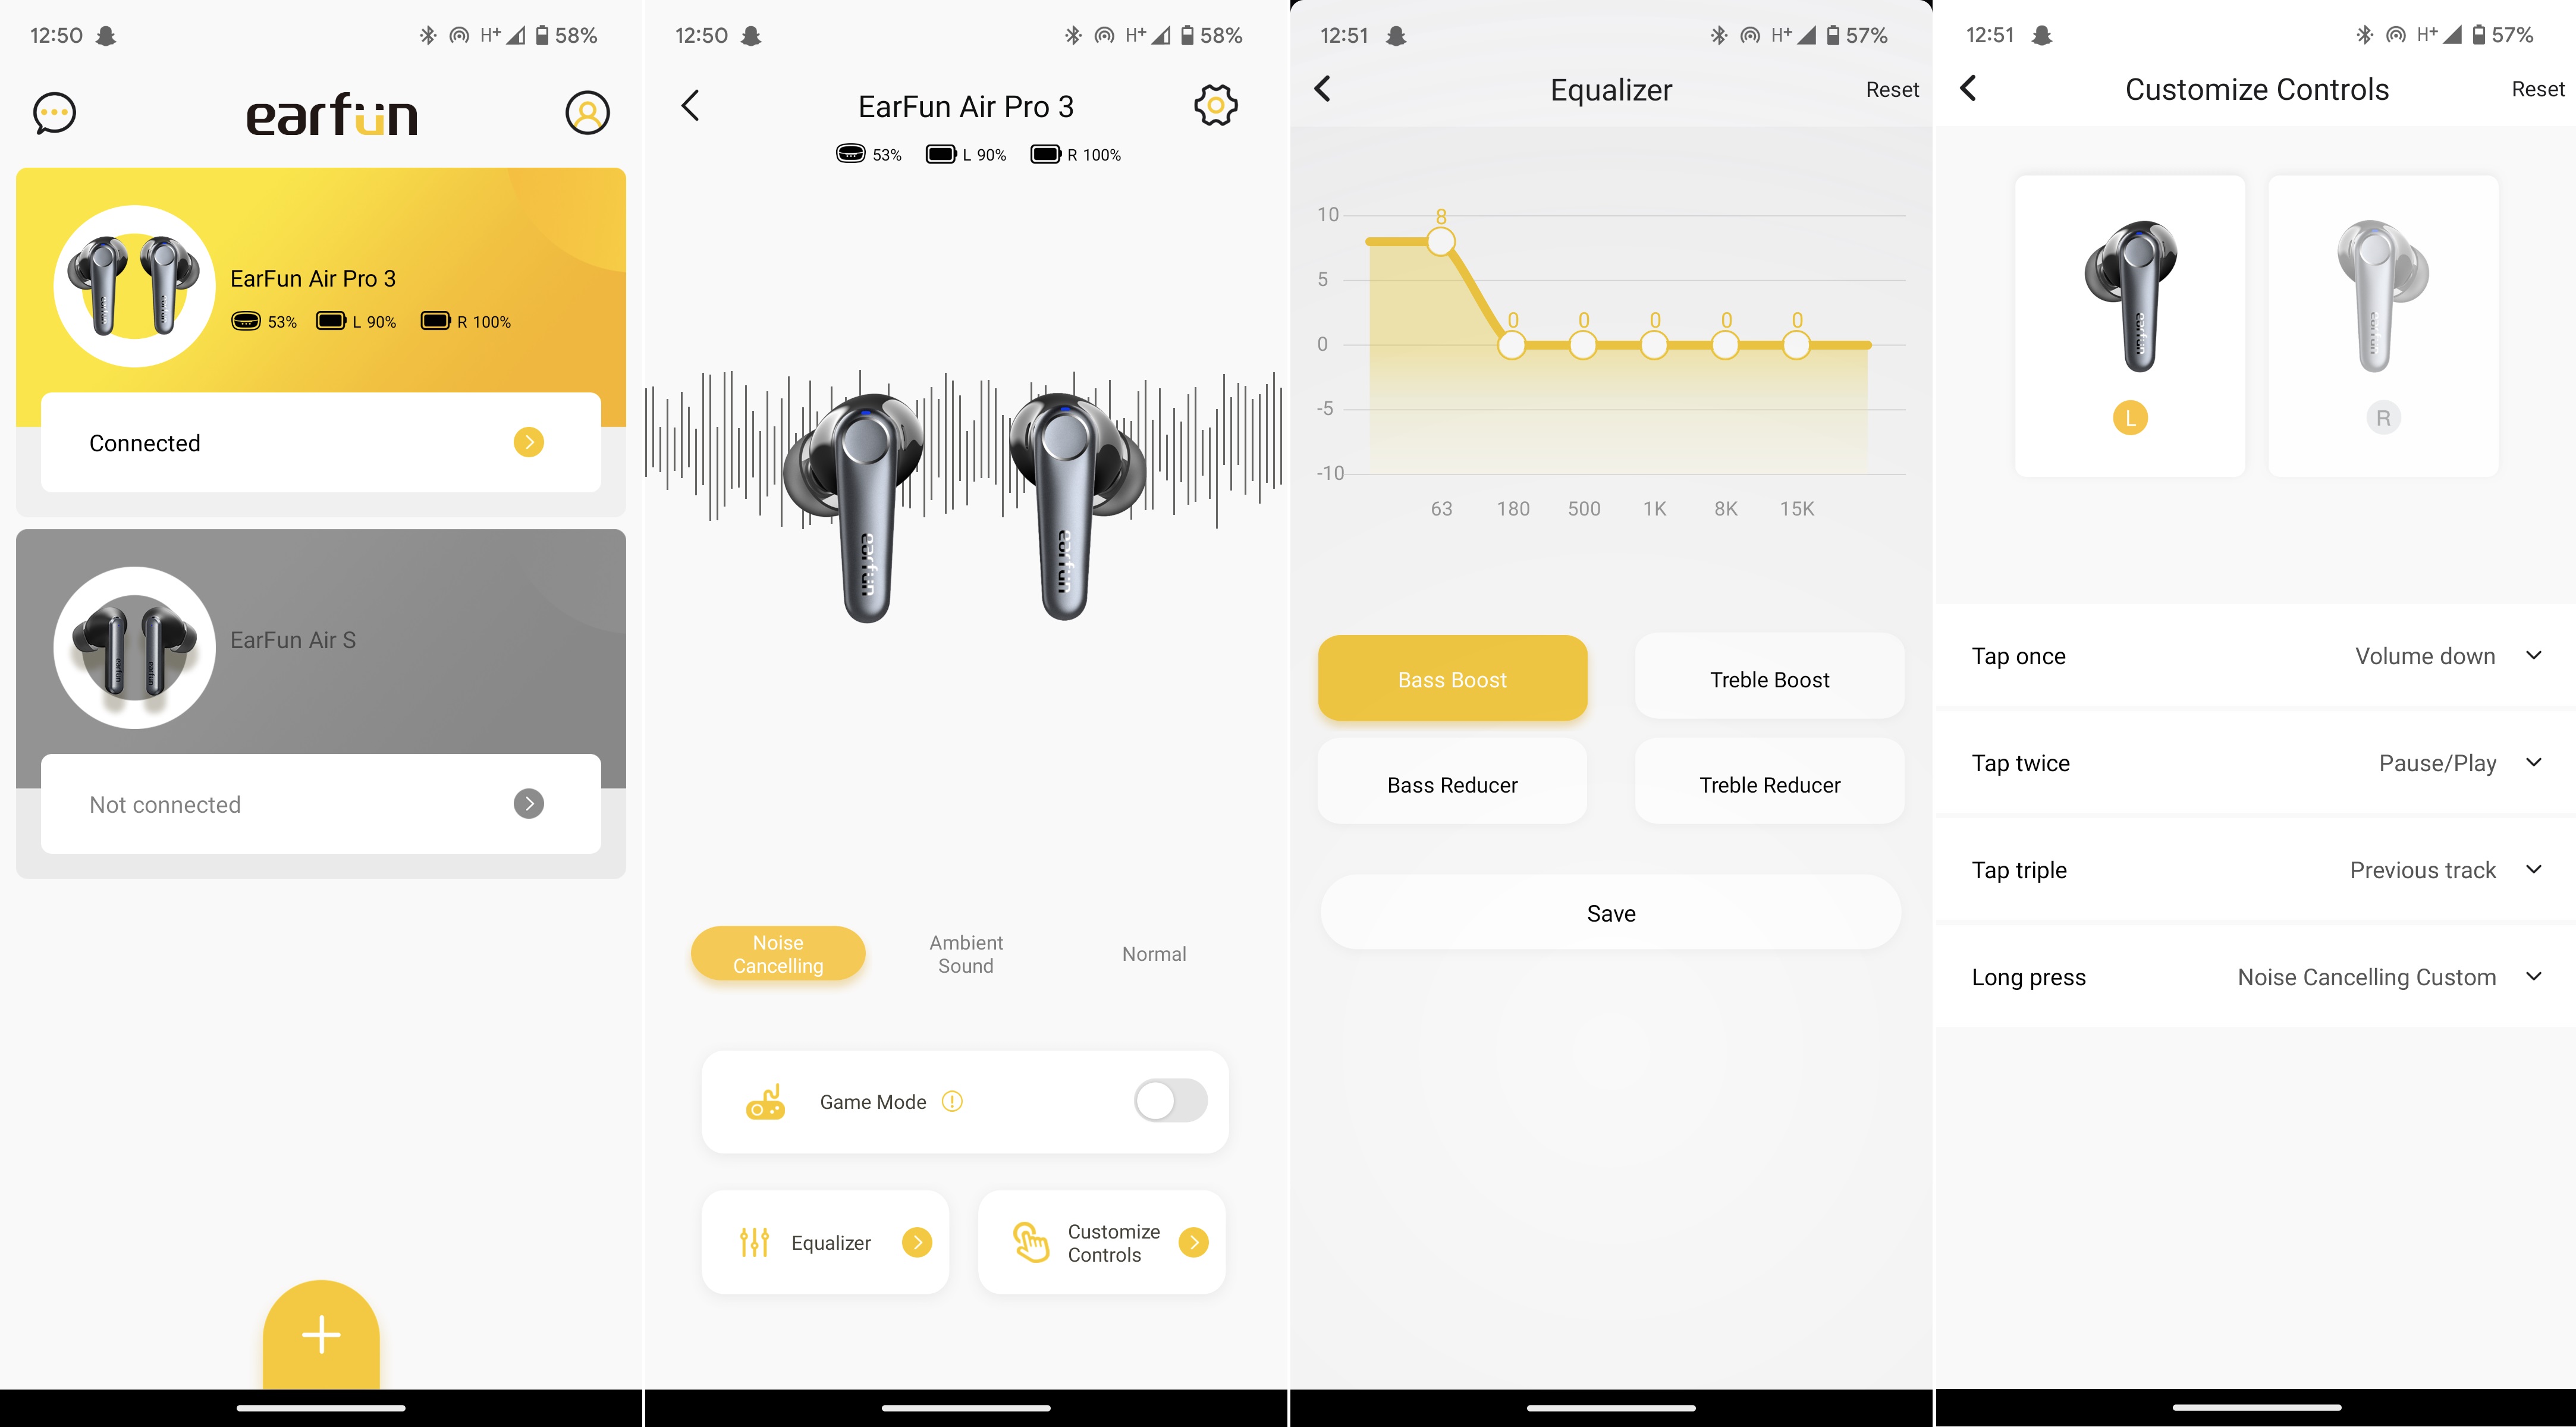 EarFun app for Android showcasing options for the EarFun Air Pro 3 wireless earbuds.